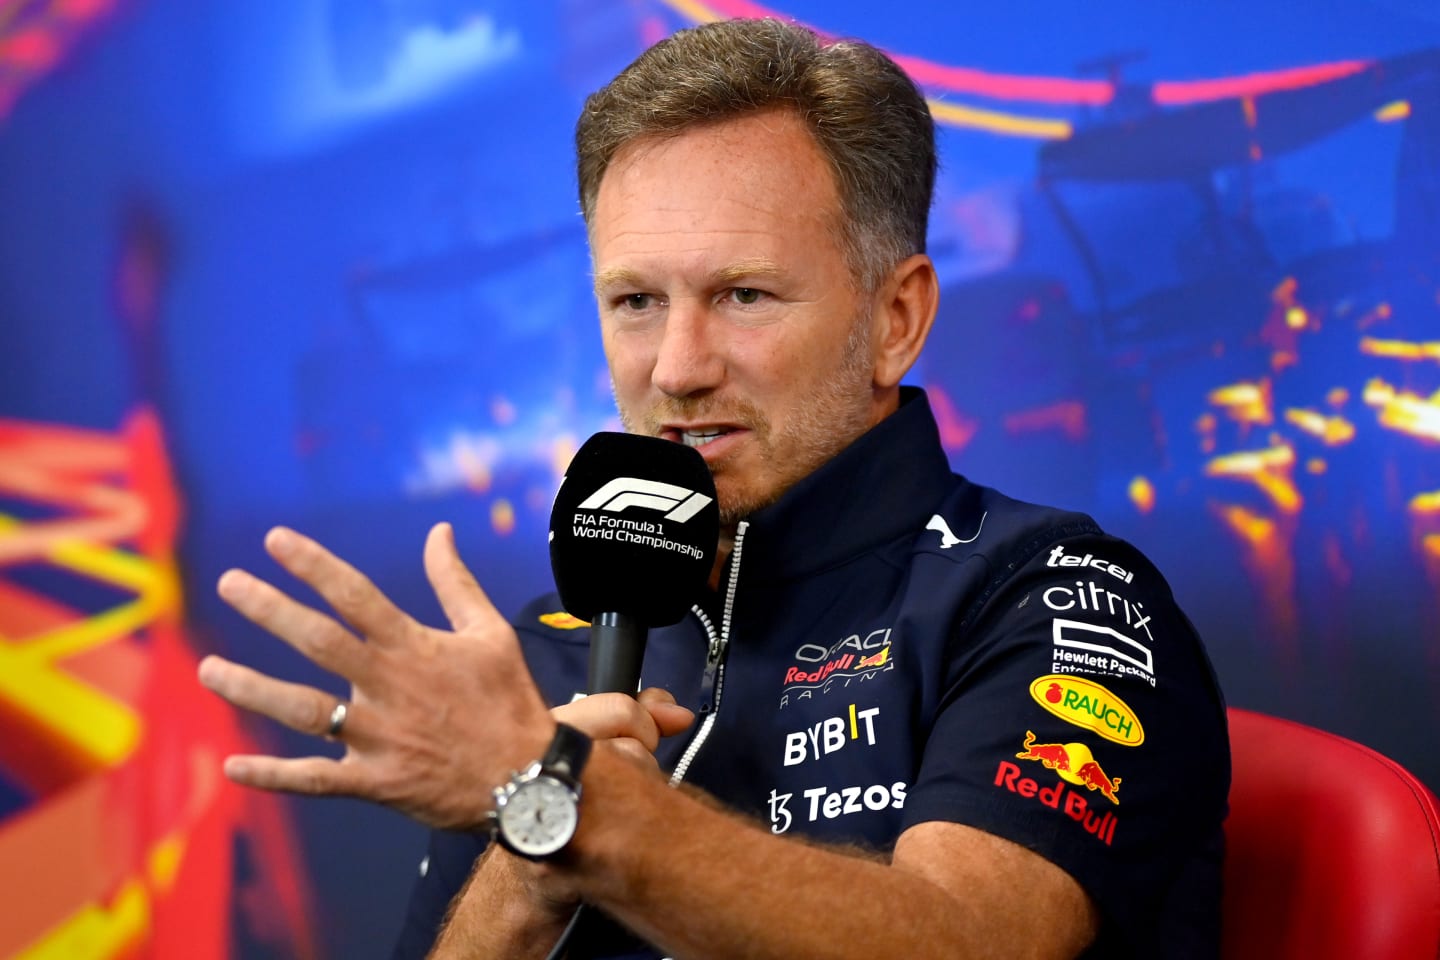 SPA, BELGIUM - AUGUST 27: Red Bull Racing Team Principal Christian Horner attends the Team Principals Press Conference prior to final practice ahead of the F1 Grand Prix of Belgium at Circuit de Spa-Francorchamps on August 27, 2022 in Spa, Belgium. (Photo by Dan Mullan/Getty Images)